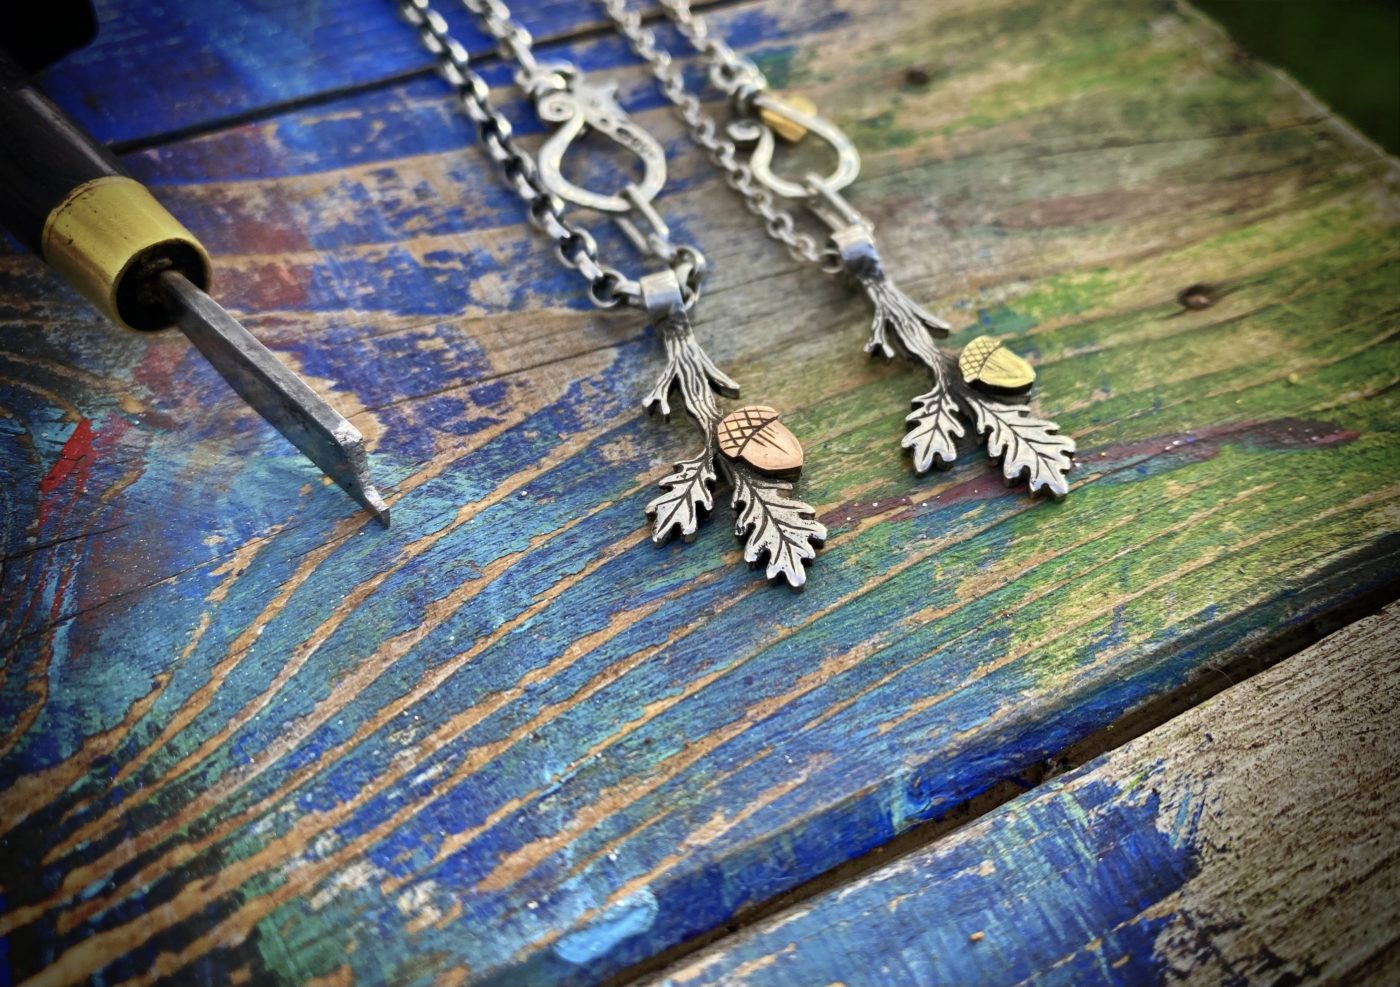 mighty oak leaves necklace ethical jewellery made from recycled silver coins.